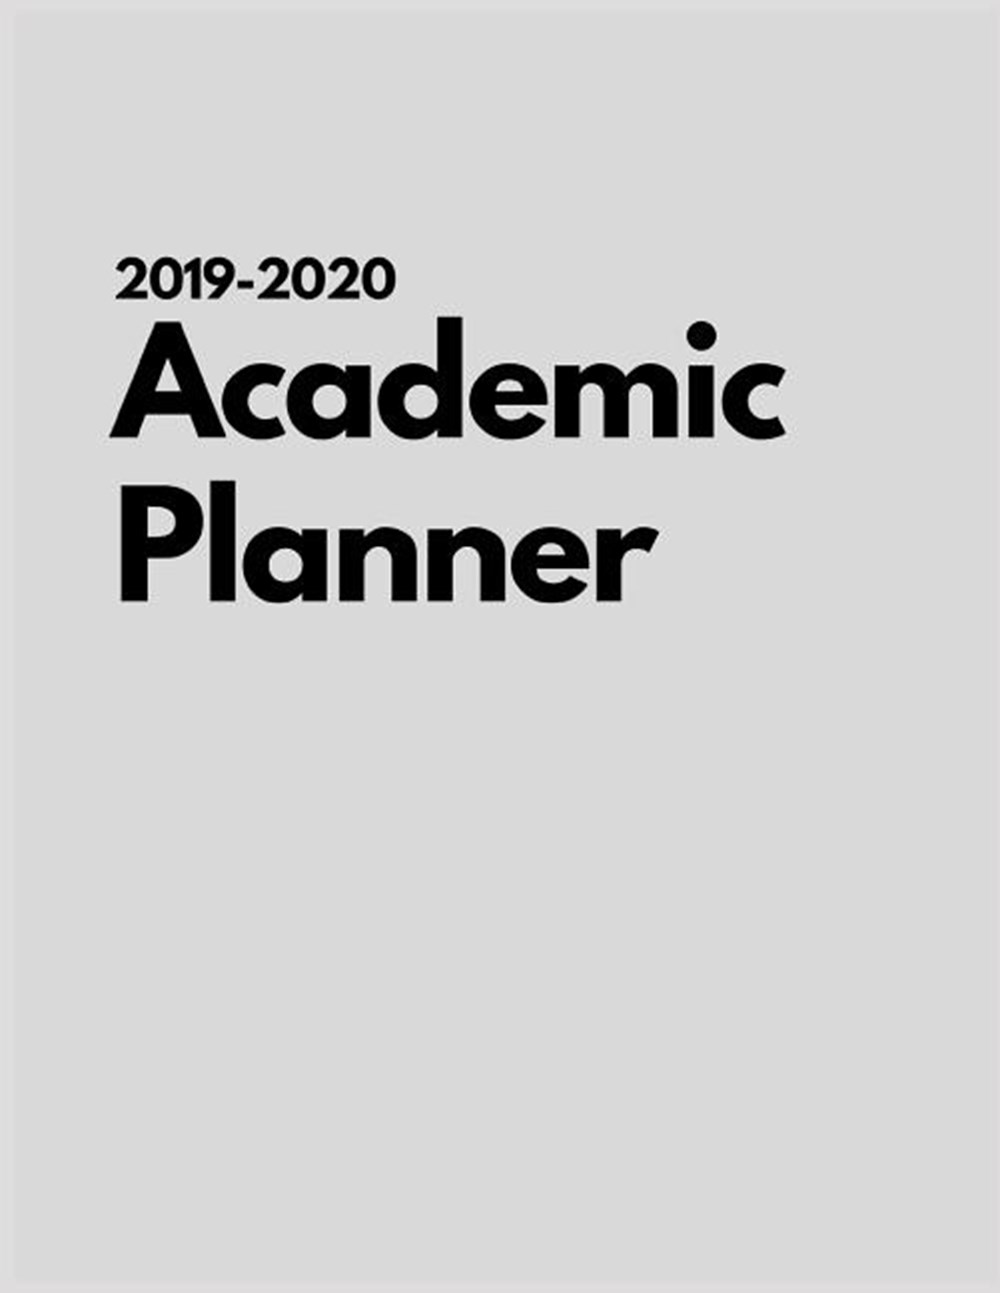 2019-2020 Academic planner 2019-2020 Weekly & Monthly View Planner, Organizer & Diary